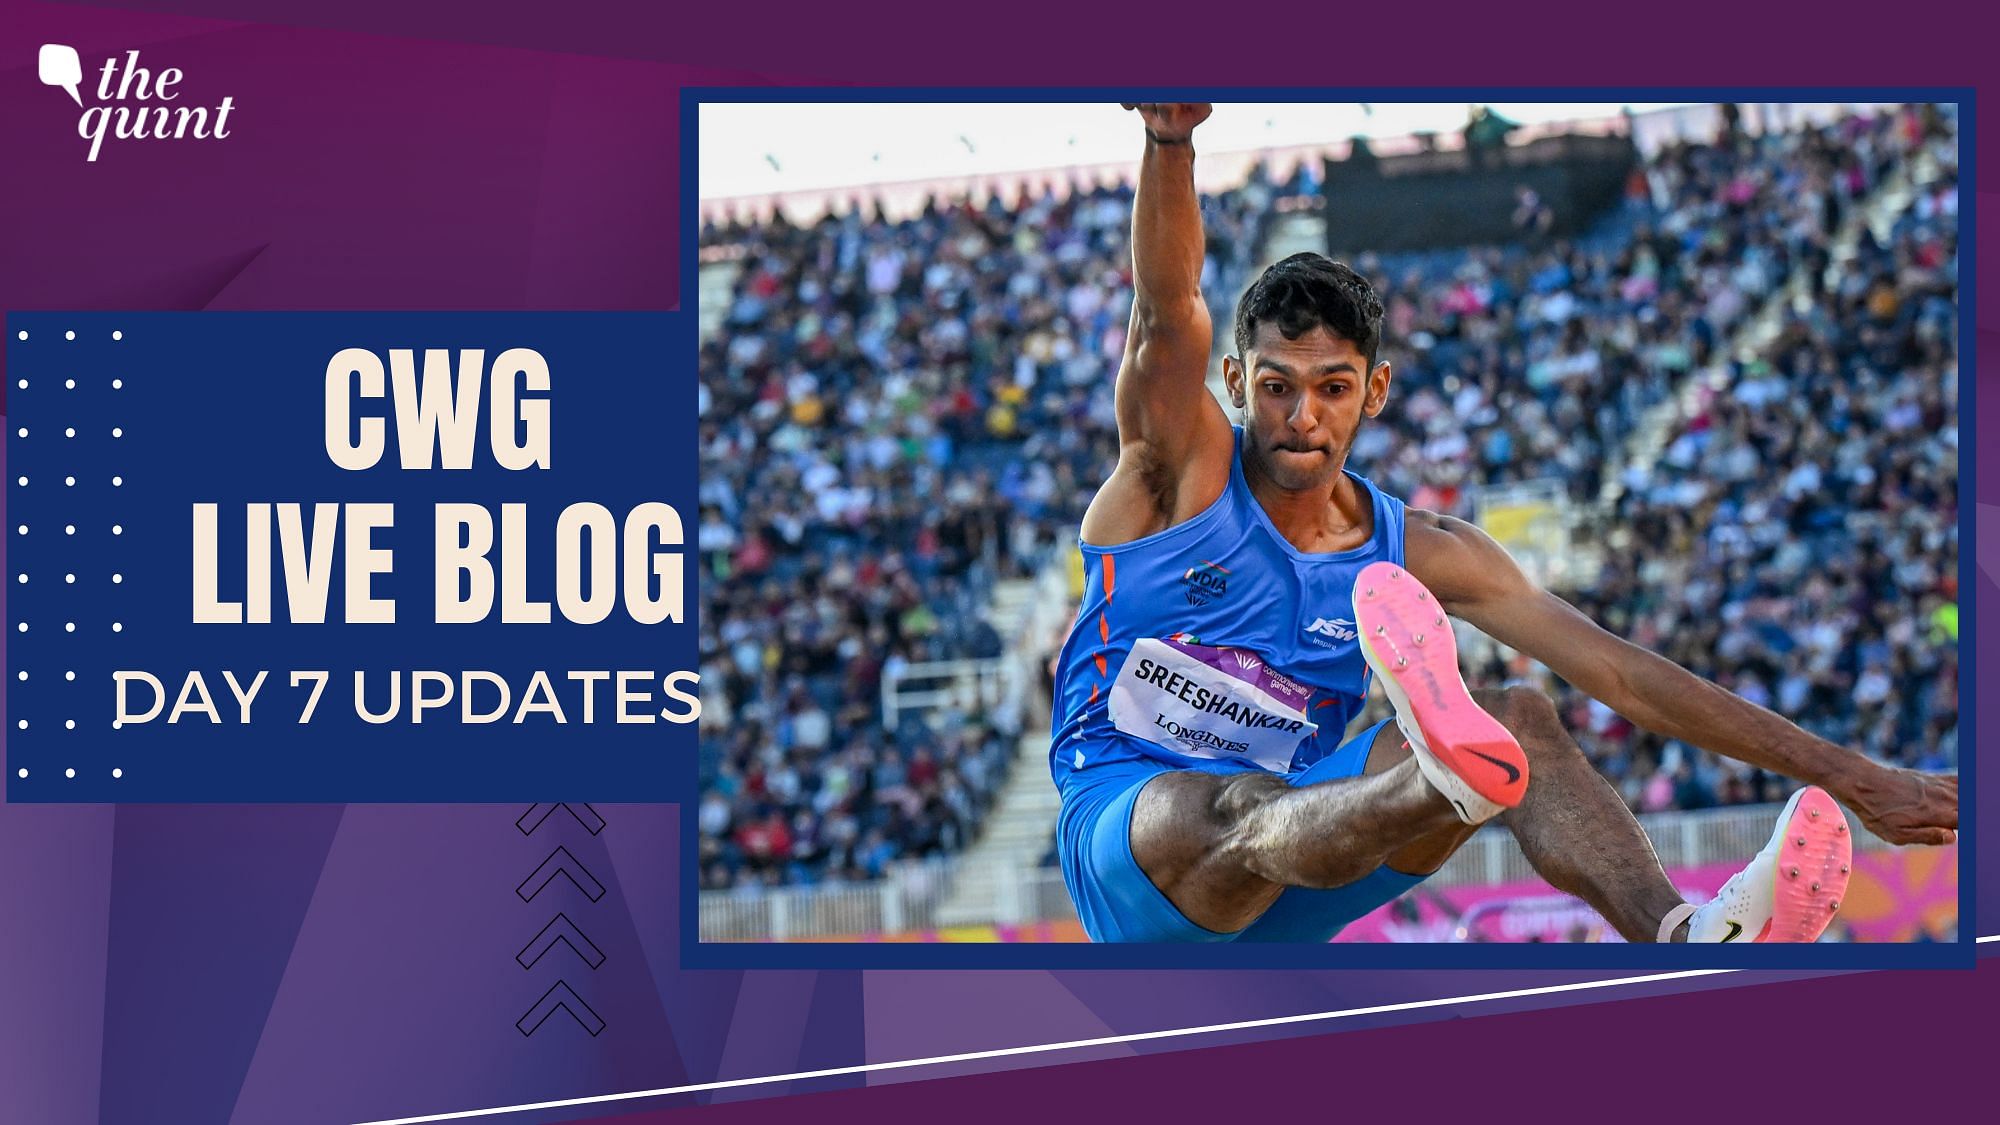 <div class="paragraphs"><p>Latest Updates from Day of CWG 2022, where Murali Sreeshankar won a historic silver medal for India in the men's long jump final, while Amit Panghal, Jaismine Lamboria, Sagar Ahlawat, and Rohit Tokas have assured medals in boxing.</p></div>